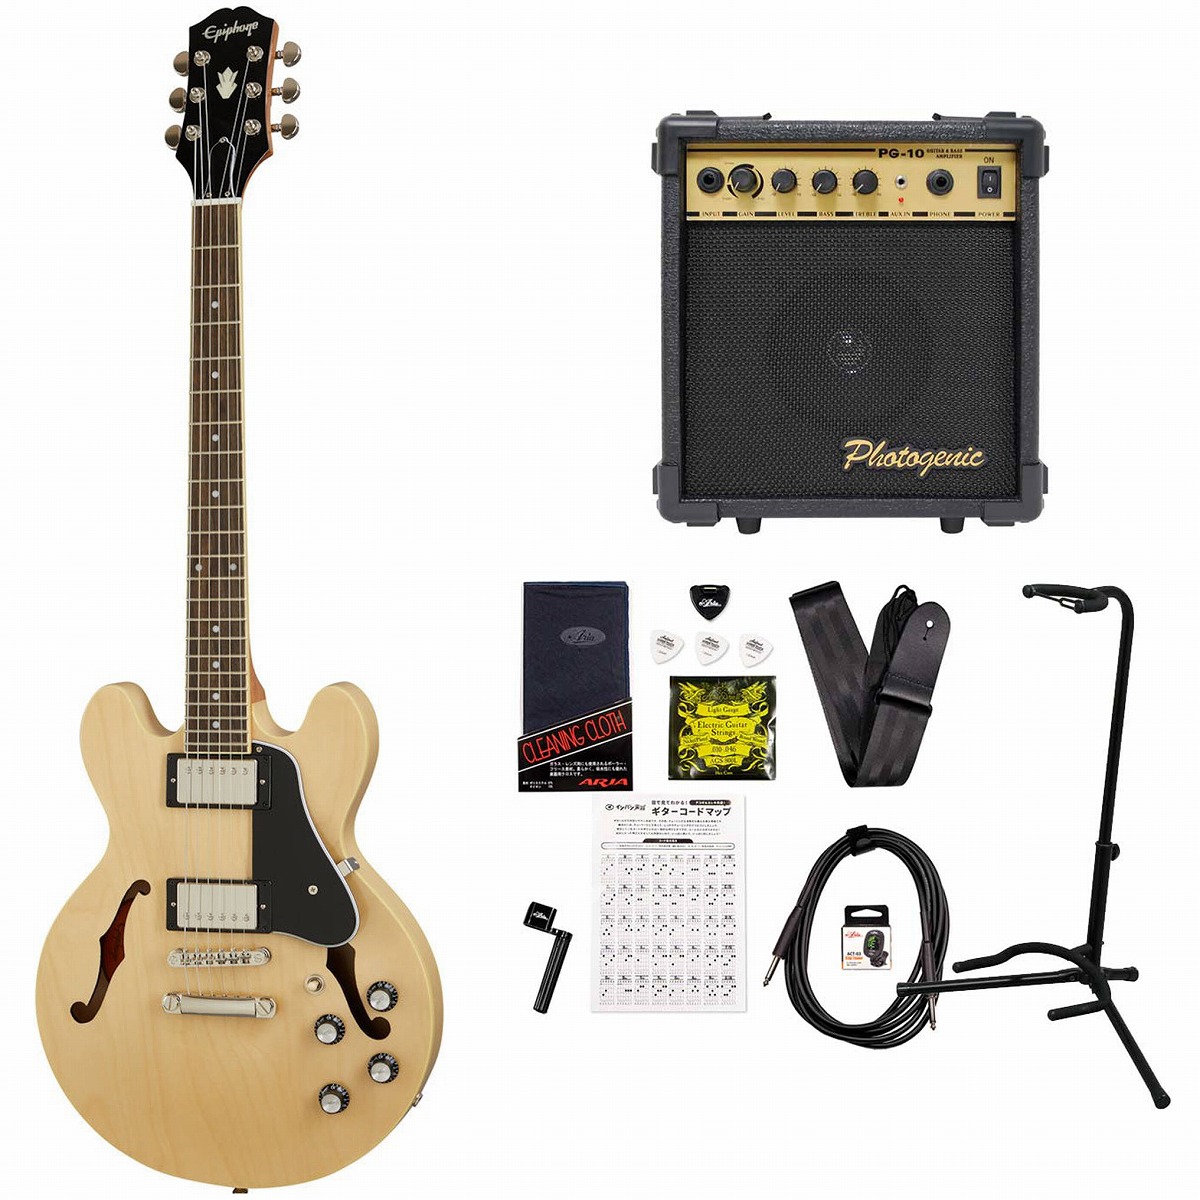 Epiphone / Inspired by Gibson ES-339 Natural エピフォン セミアコ ES339  PG-10アンプ付属エレキギター初心者セット